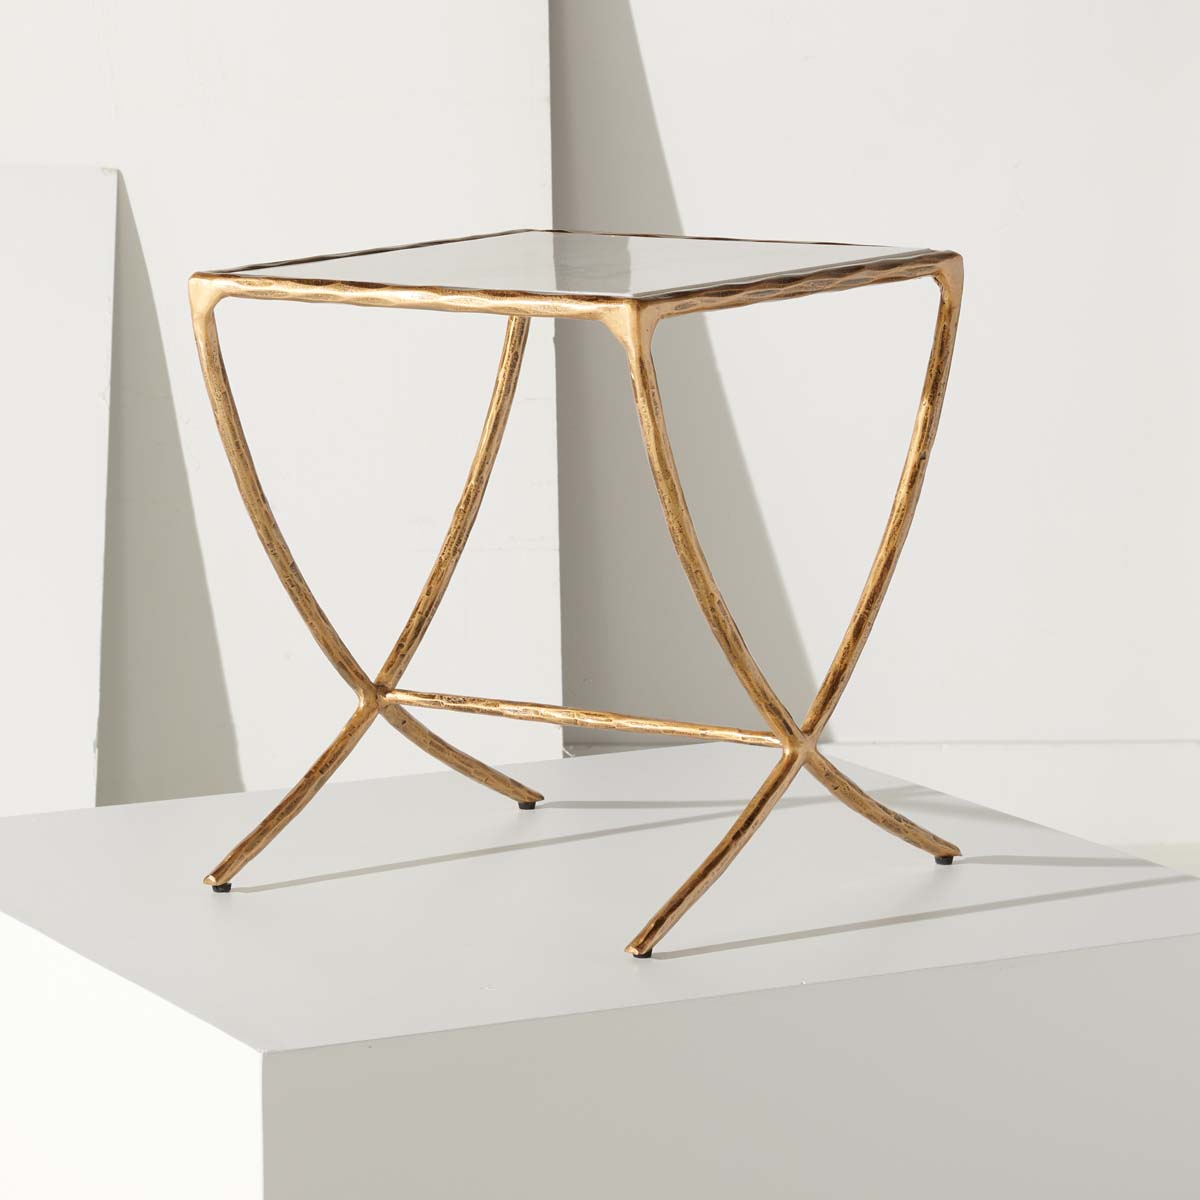 Safavieh Couture Debbie Square Metal Accent Table - Brass / White